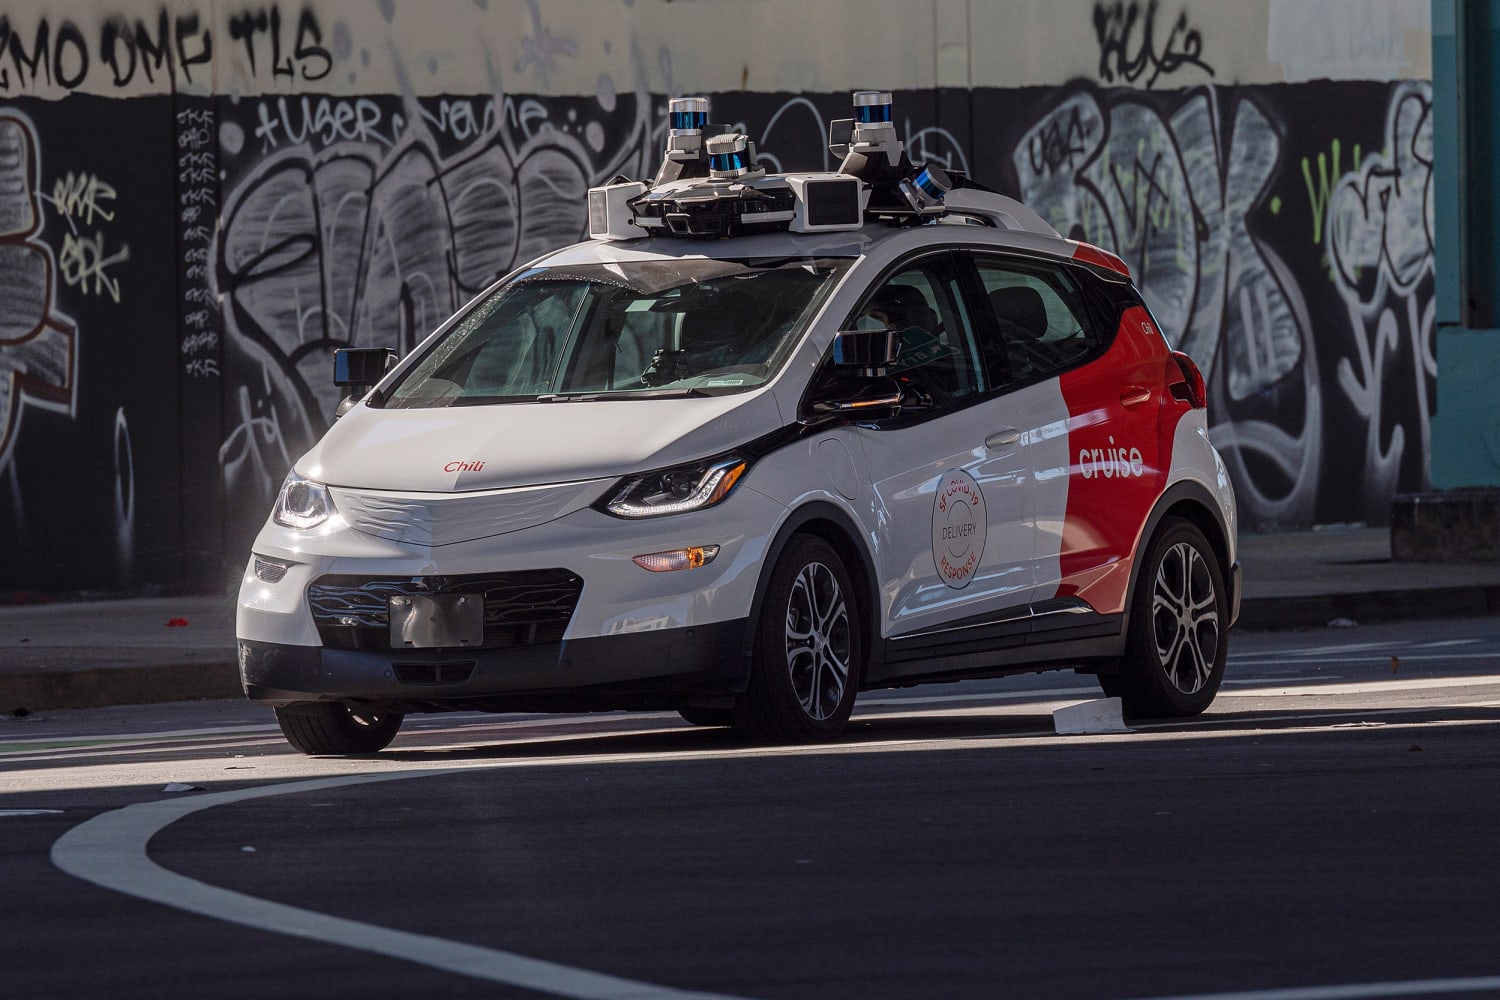 Google's Self-Driving Car Caused Its First Crash